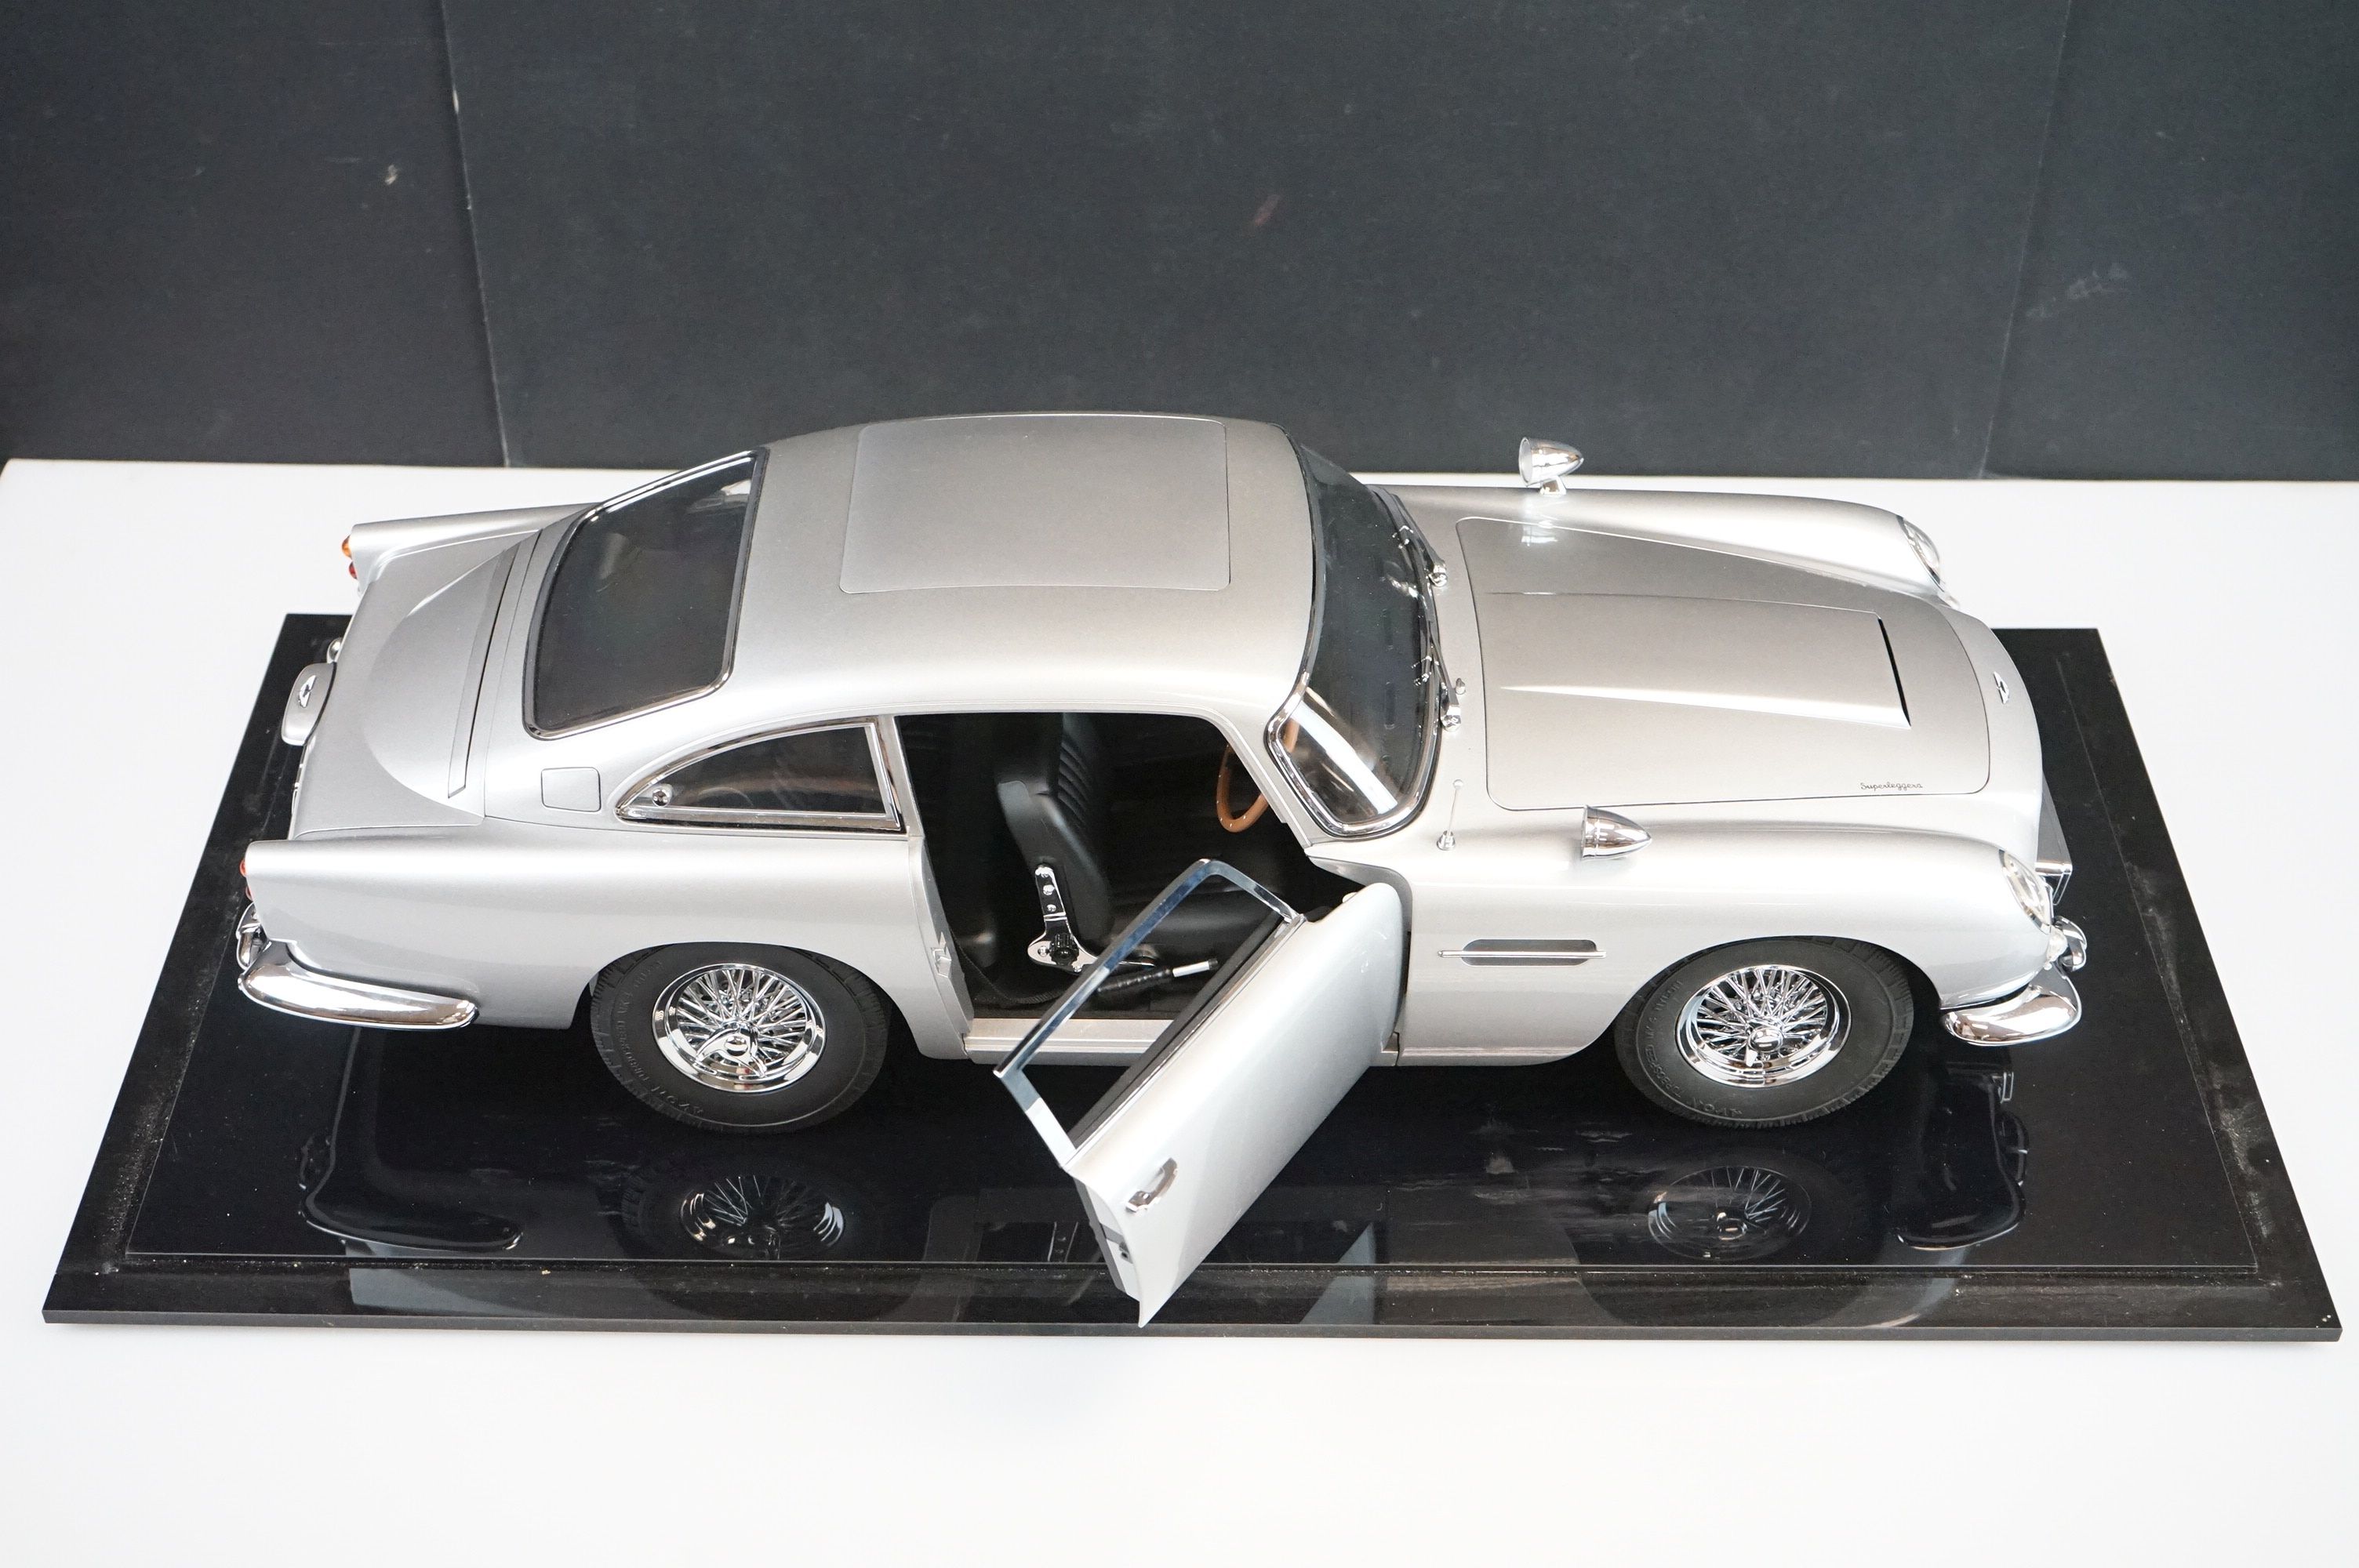 1/8 Scale James Bond Aston Martin DB5 kit built diecast model, produced by Eaglemoss for home - Image 5 of 13